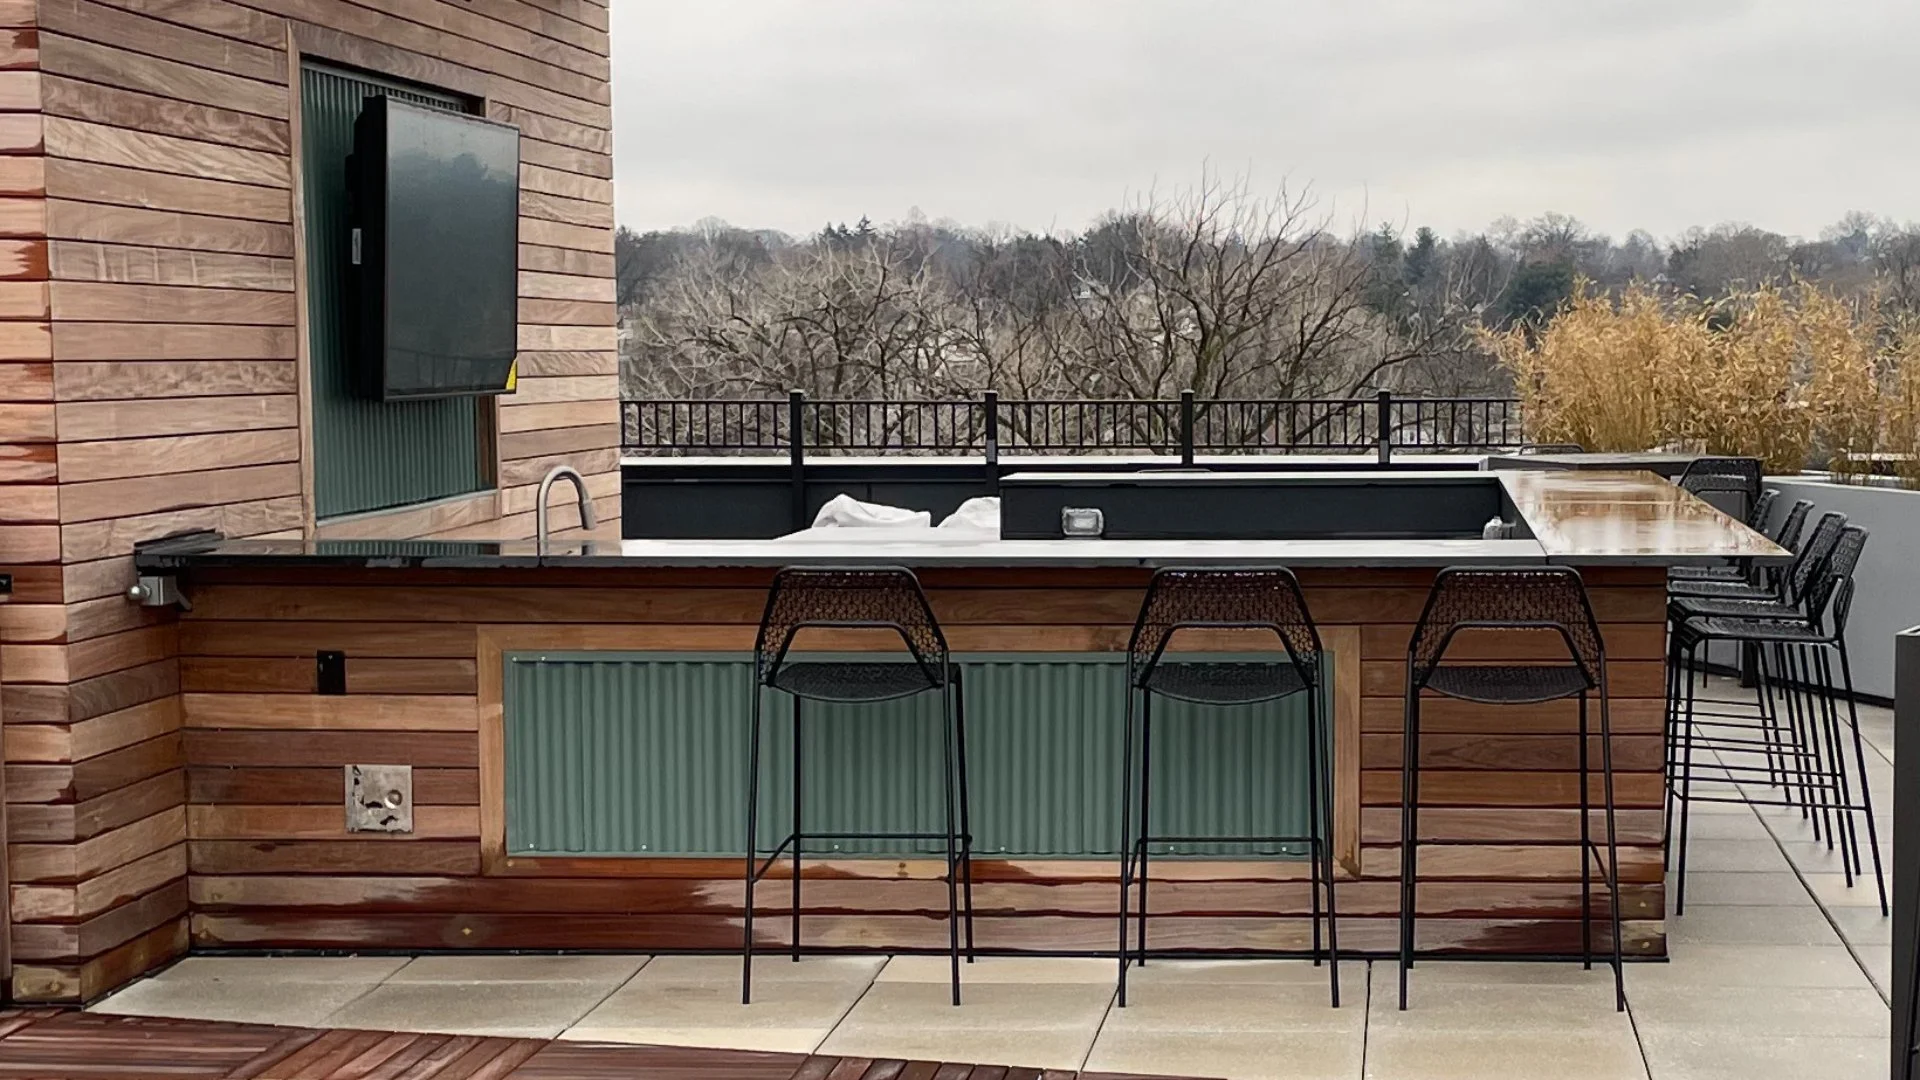 Designing an Outdoor Kitchen? Consider These 3 Things Before Moving Forward